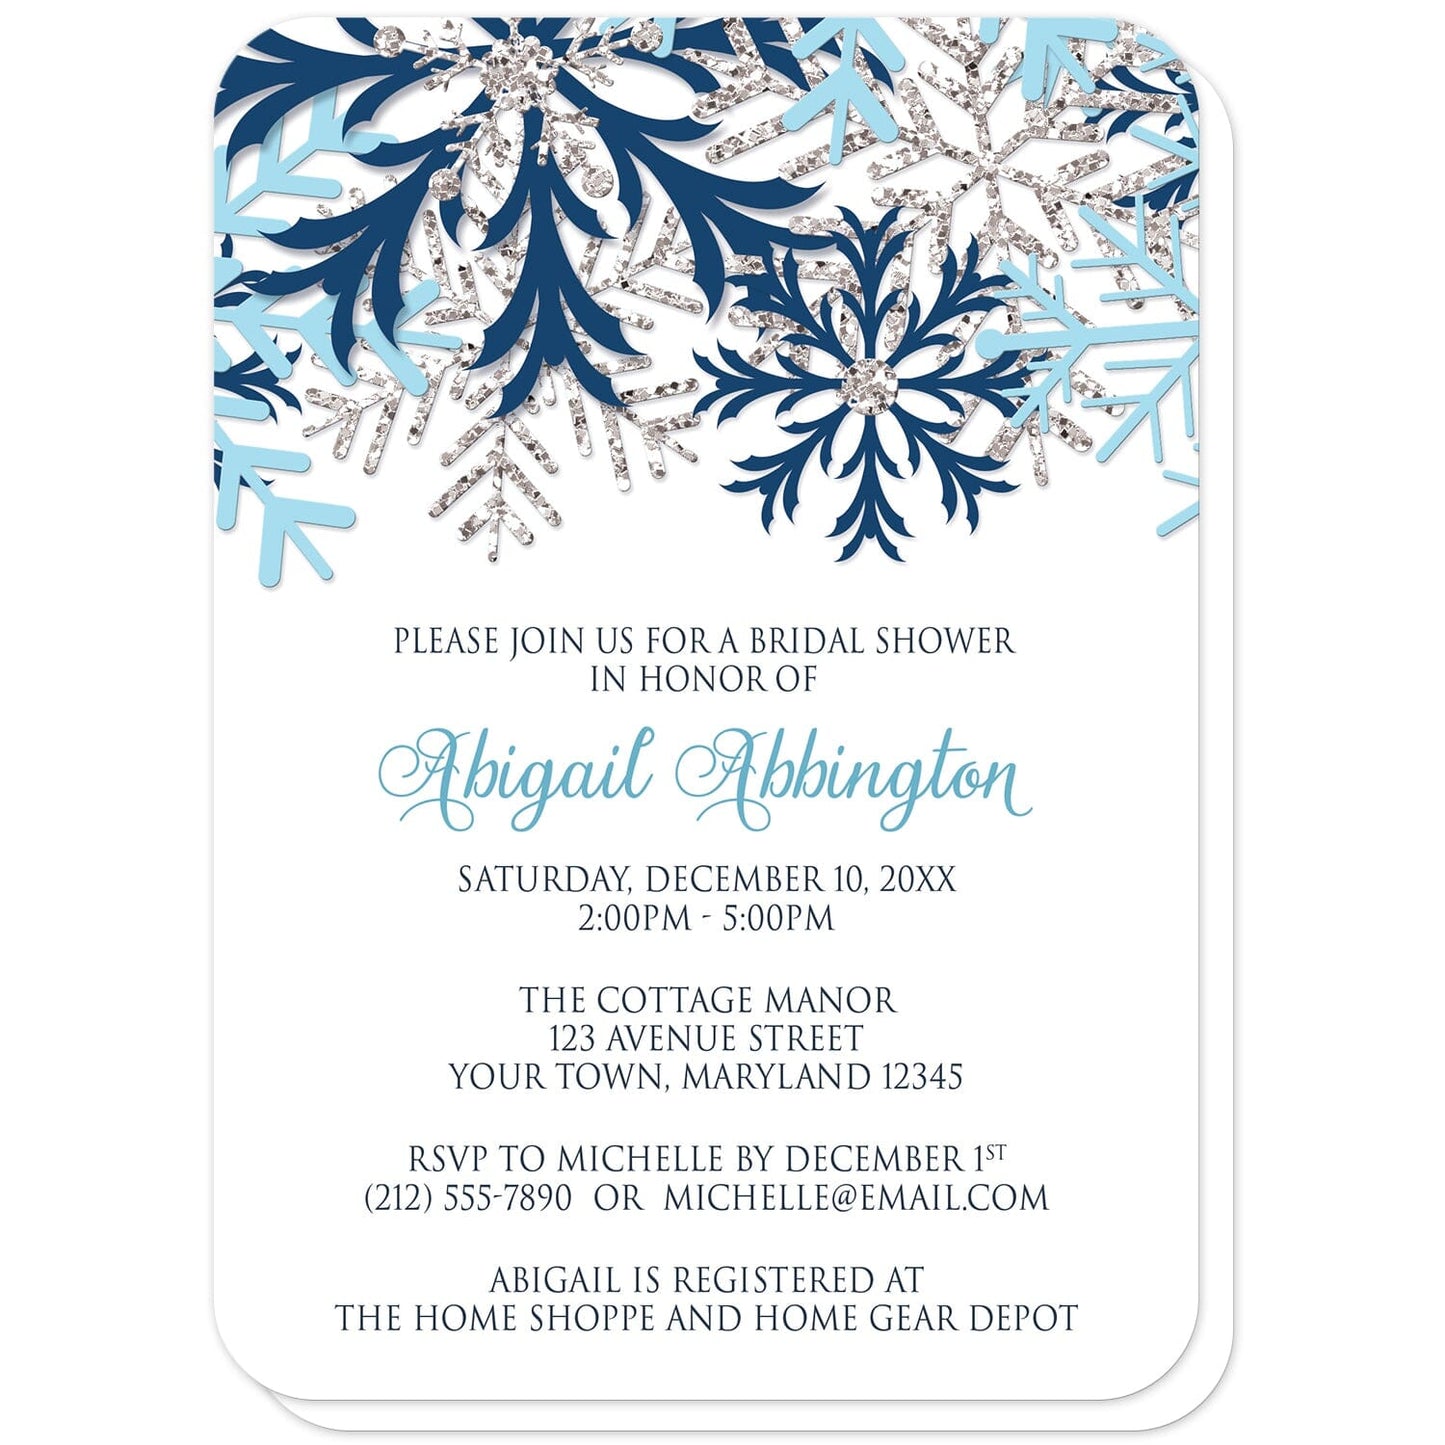 Winter Blue Silver Snowflake Bridal Shower Invitations (with rounded corners) at Artistically Invited. Beautiful winter blue silver snowflake bridal shower invitations designed with navy blue, aqua blue, and silver-colored glitter-illustrated snowflakes along the top over a white background. Your personalized bridal shower celebration details are custom printed in blue and navy blue below the pretty snowflakes.